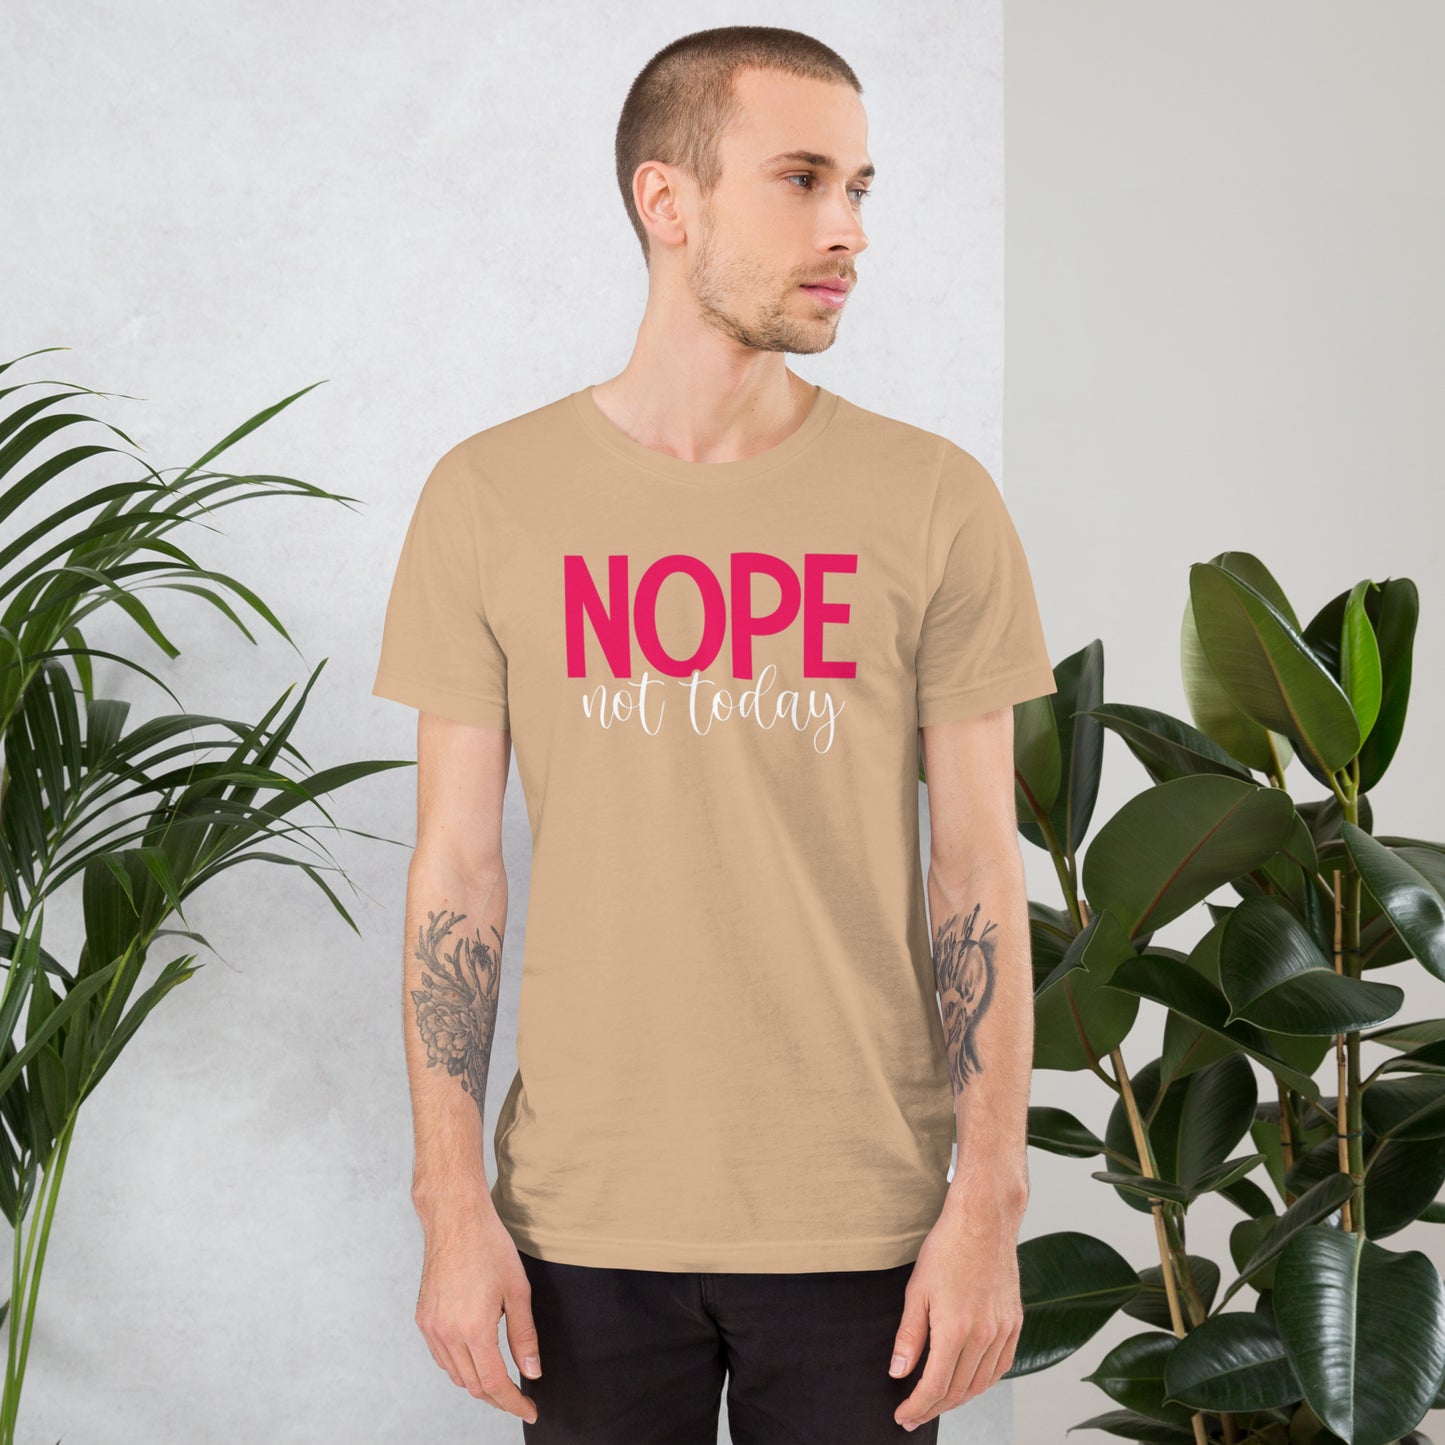 NOPE not today Unisex t-shirt